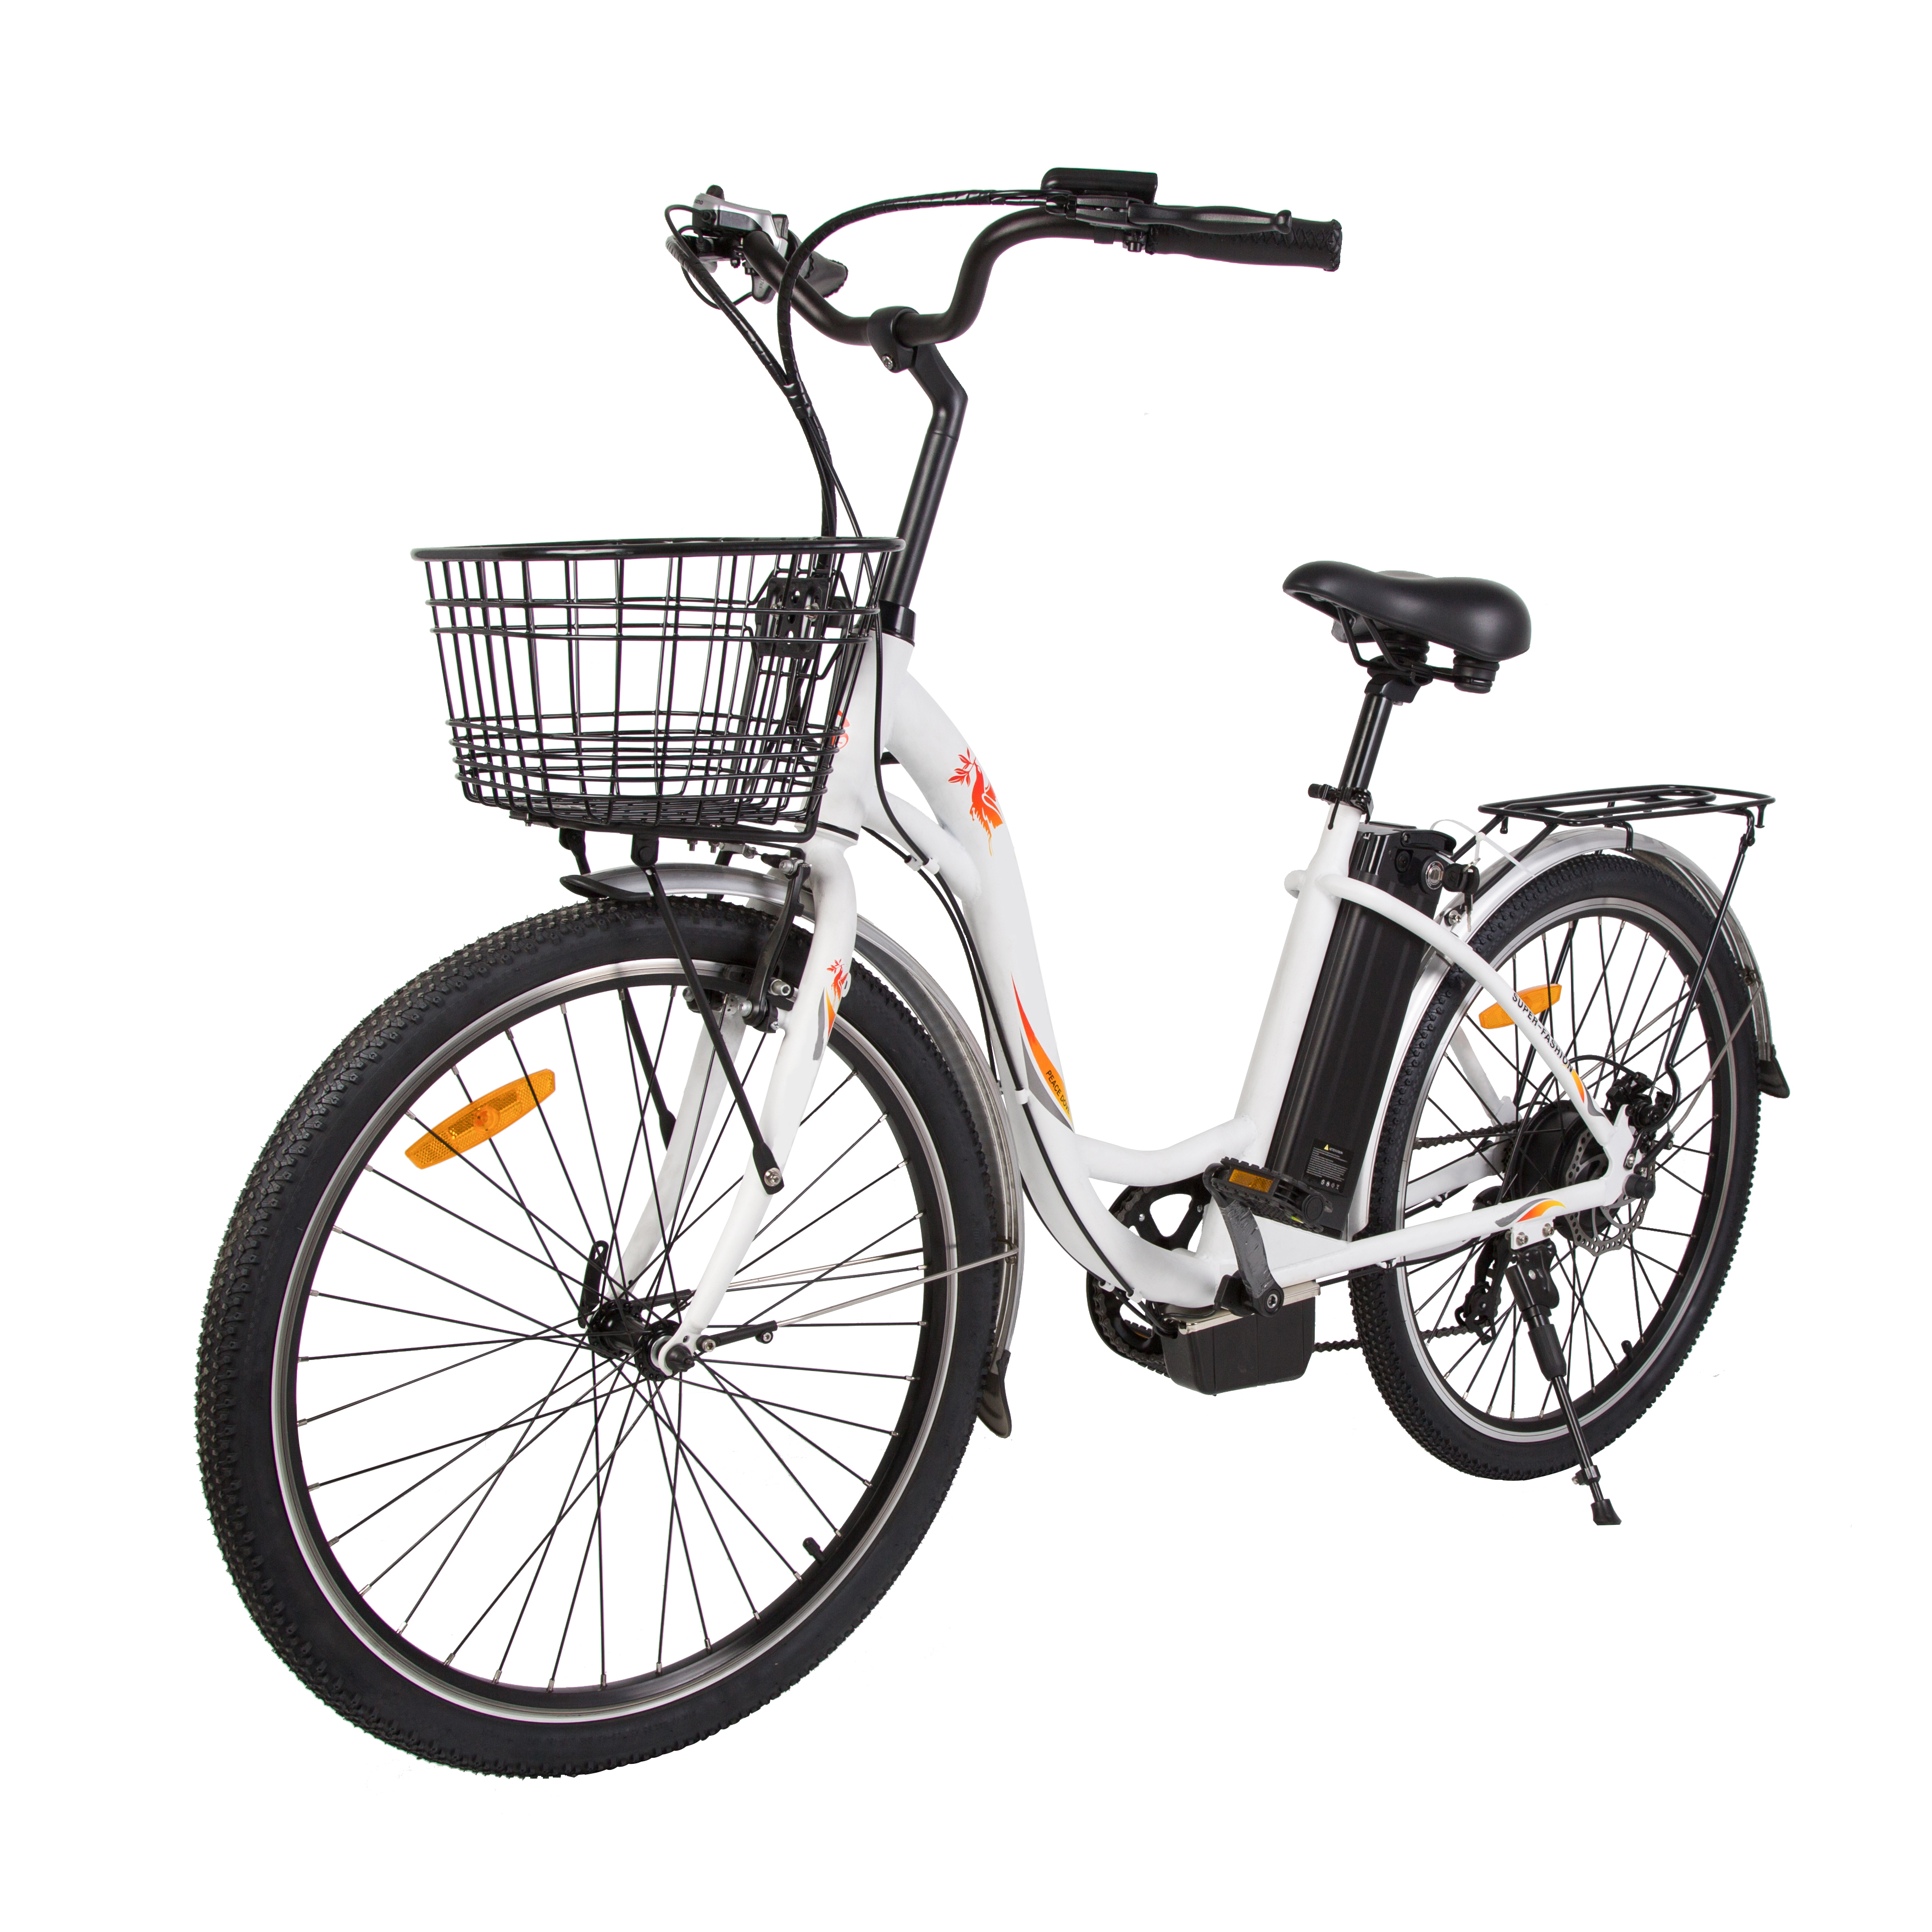 European style city electric bicycle